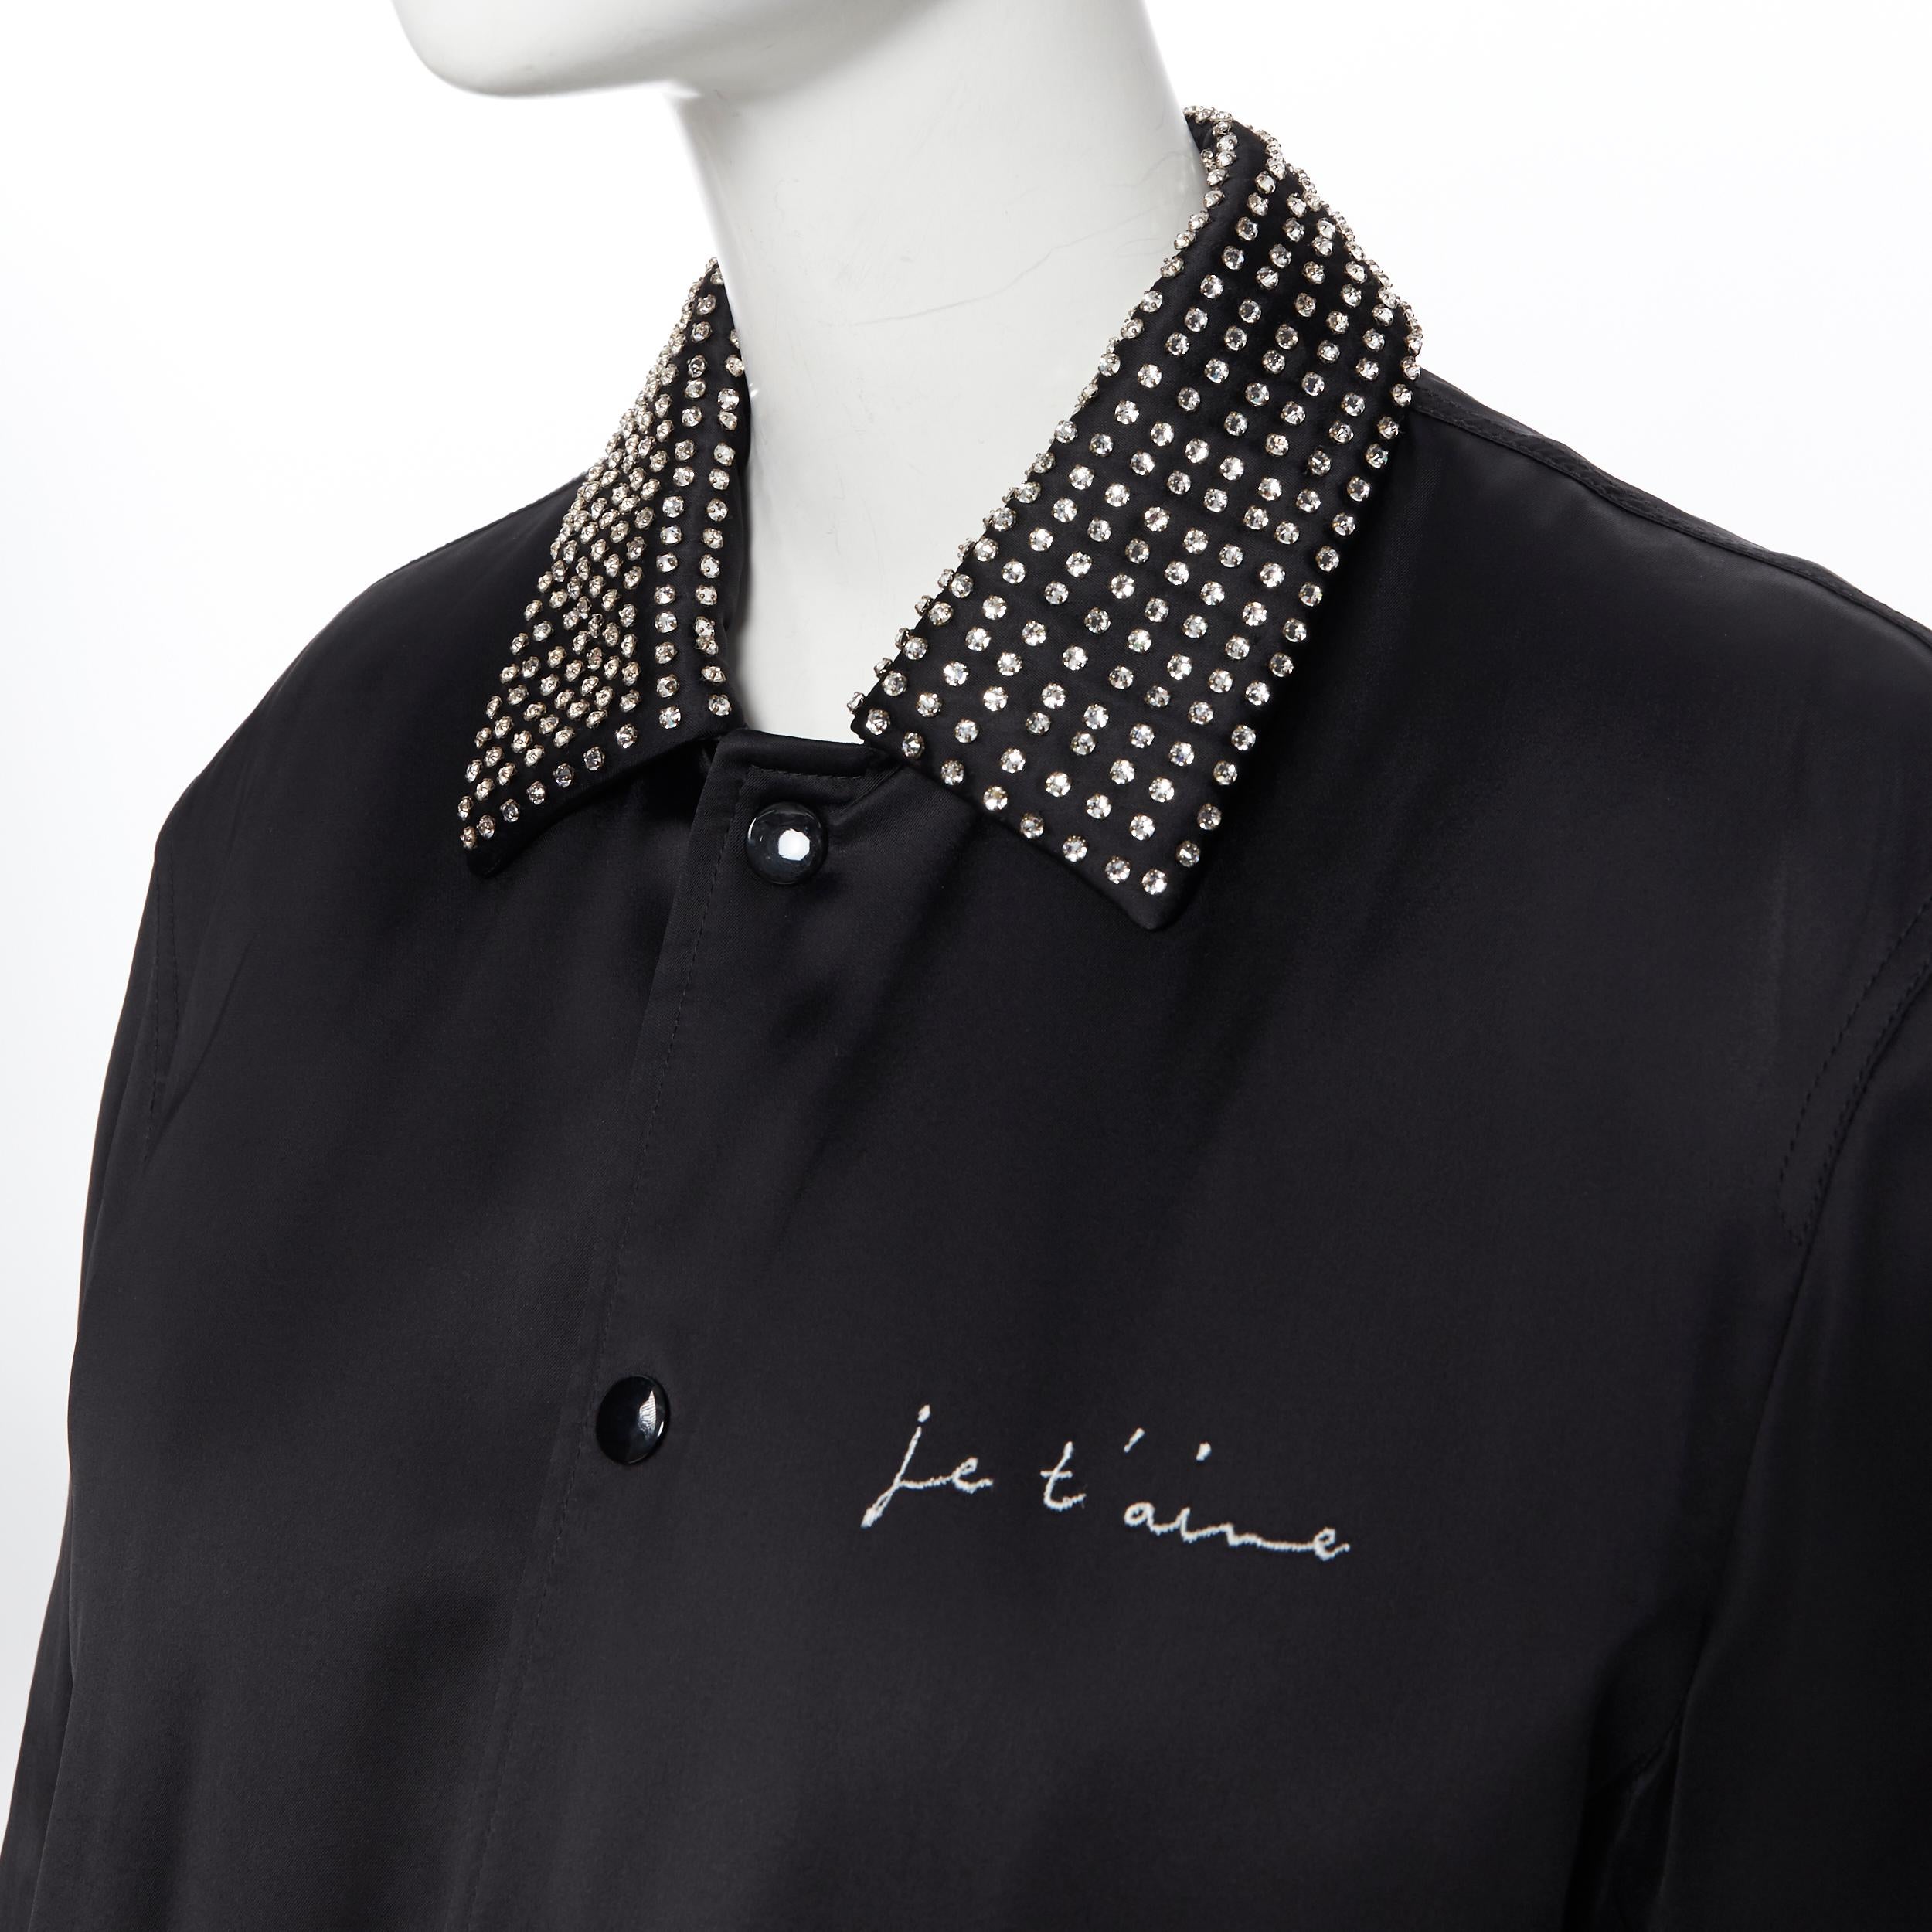 new SAINT LAURENT Je t'aime embroidery black satin strass collar Teddy bomber XS
Brand: Saint Laurent
Designer: Anthony Vacarello
Model Name / Style: Teddy jacket
Material: Viscose
Color: Black
Pattern: Solid
Closure: Snap
Extra Detail: Crystal